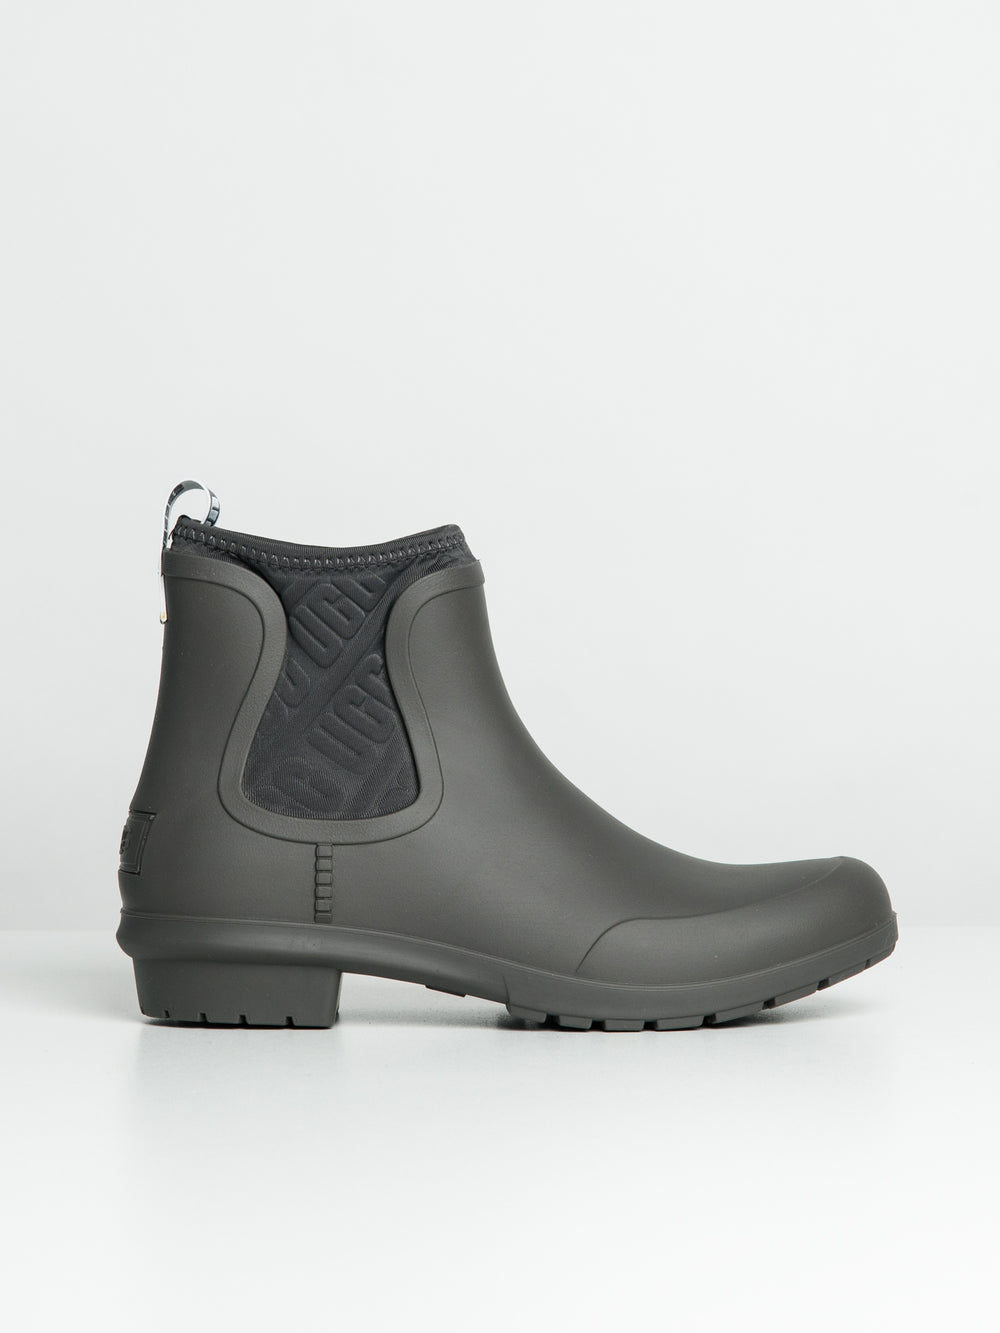 WOMENS UGG CHEVONNE BOOT - CLEARANCE